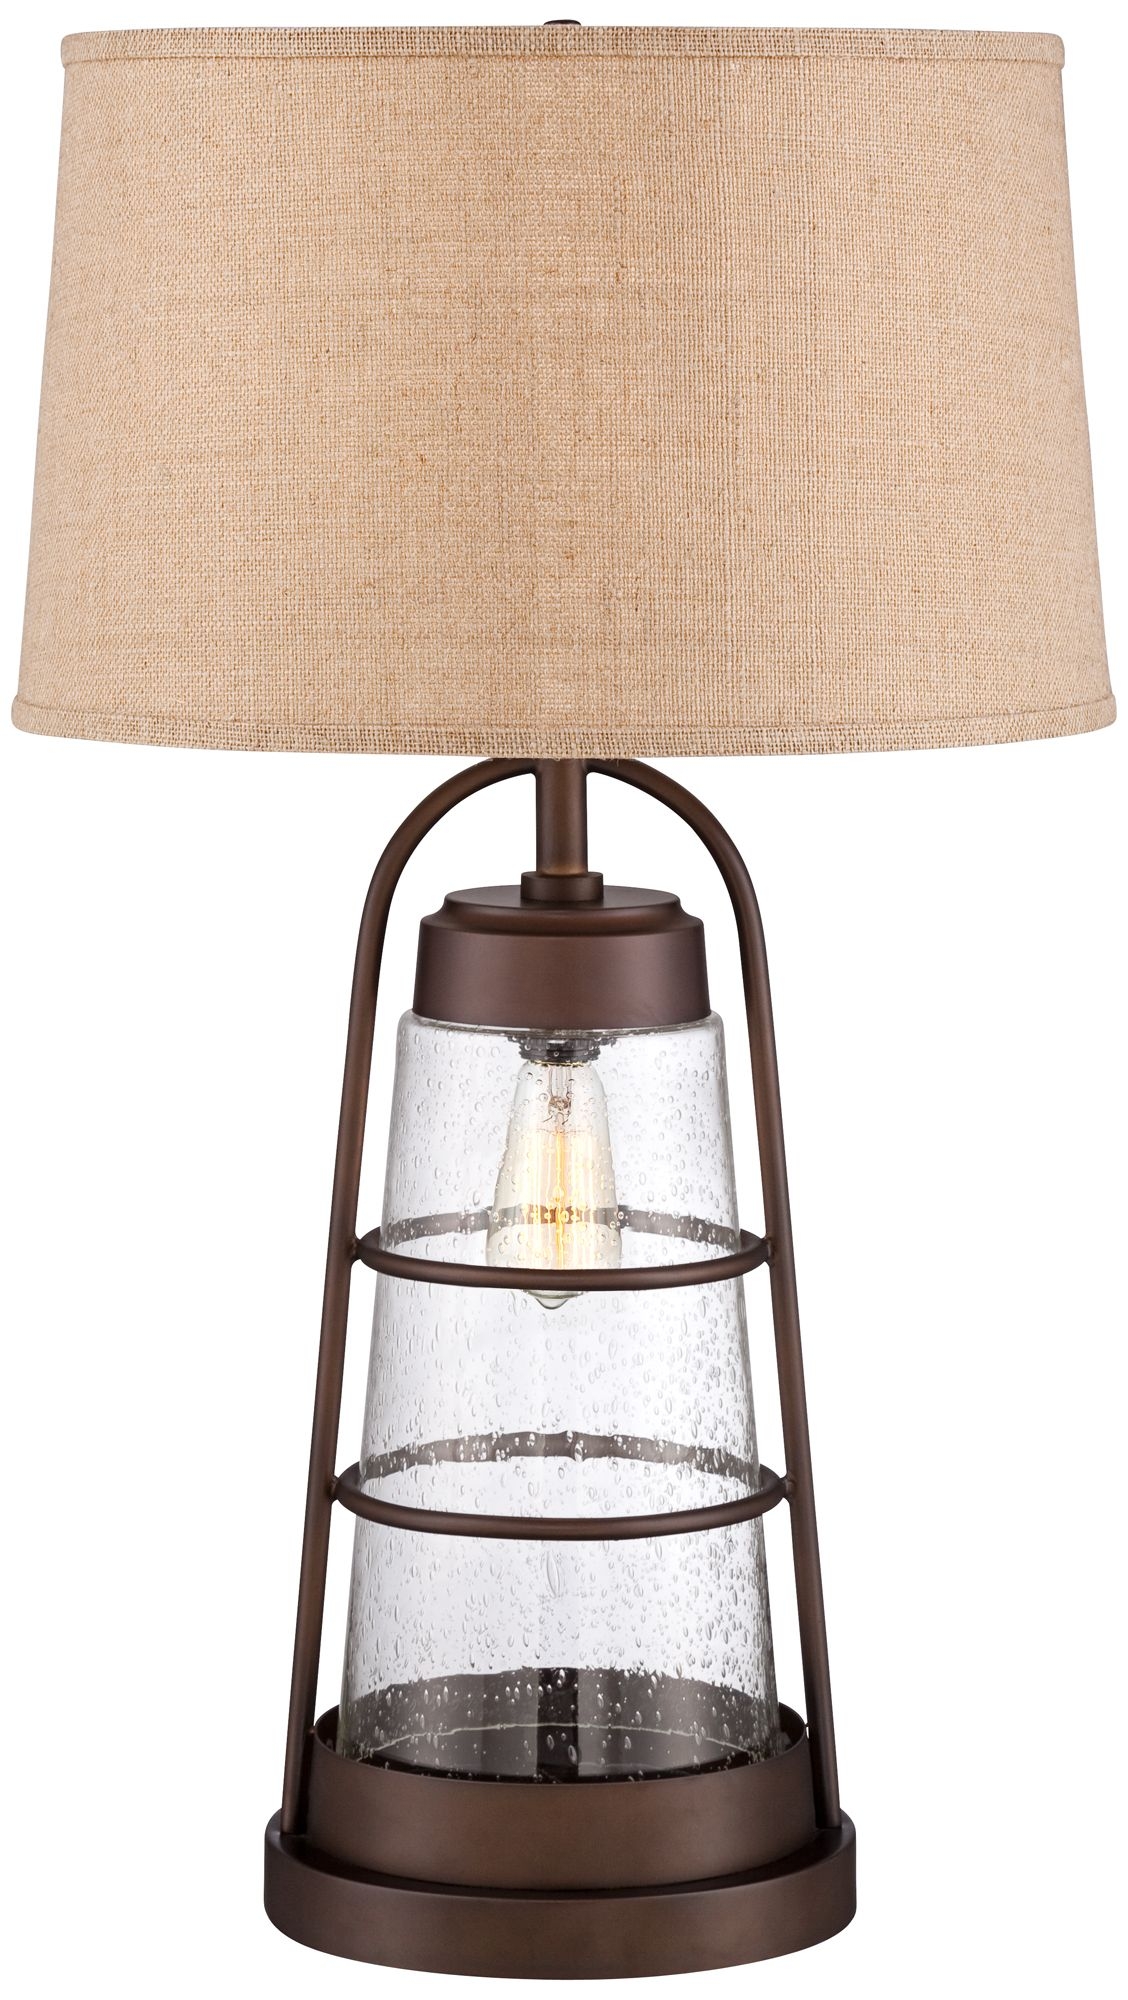 Industrial Lantern Table Lamp with Night Light - Image 0